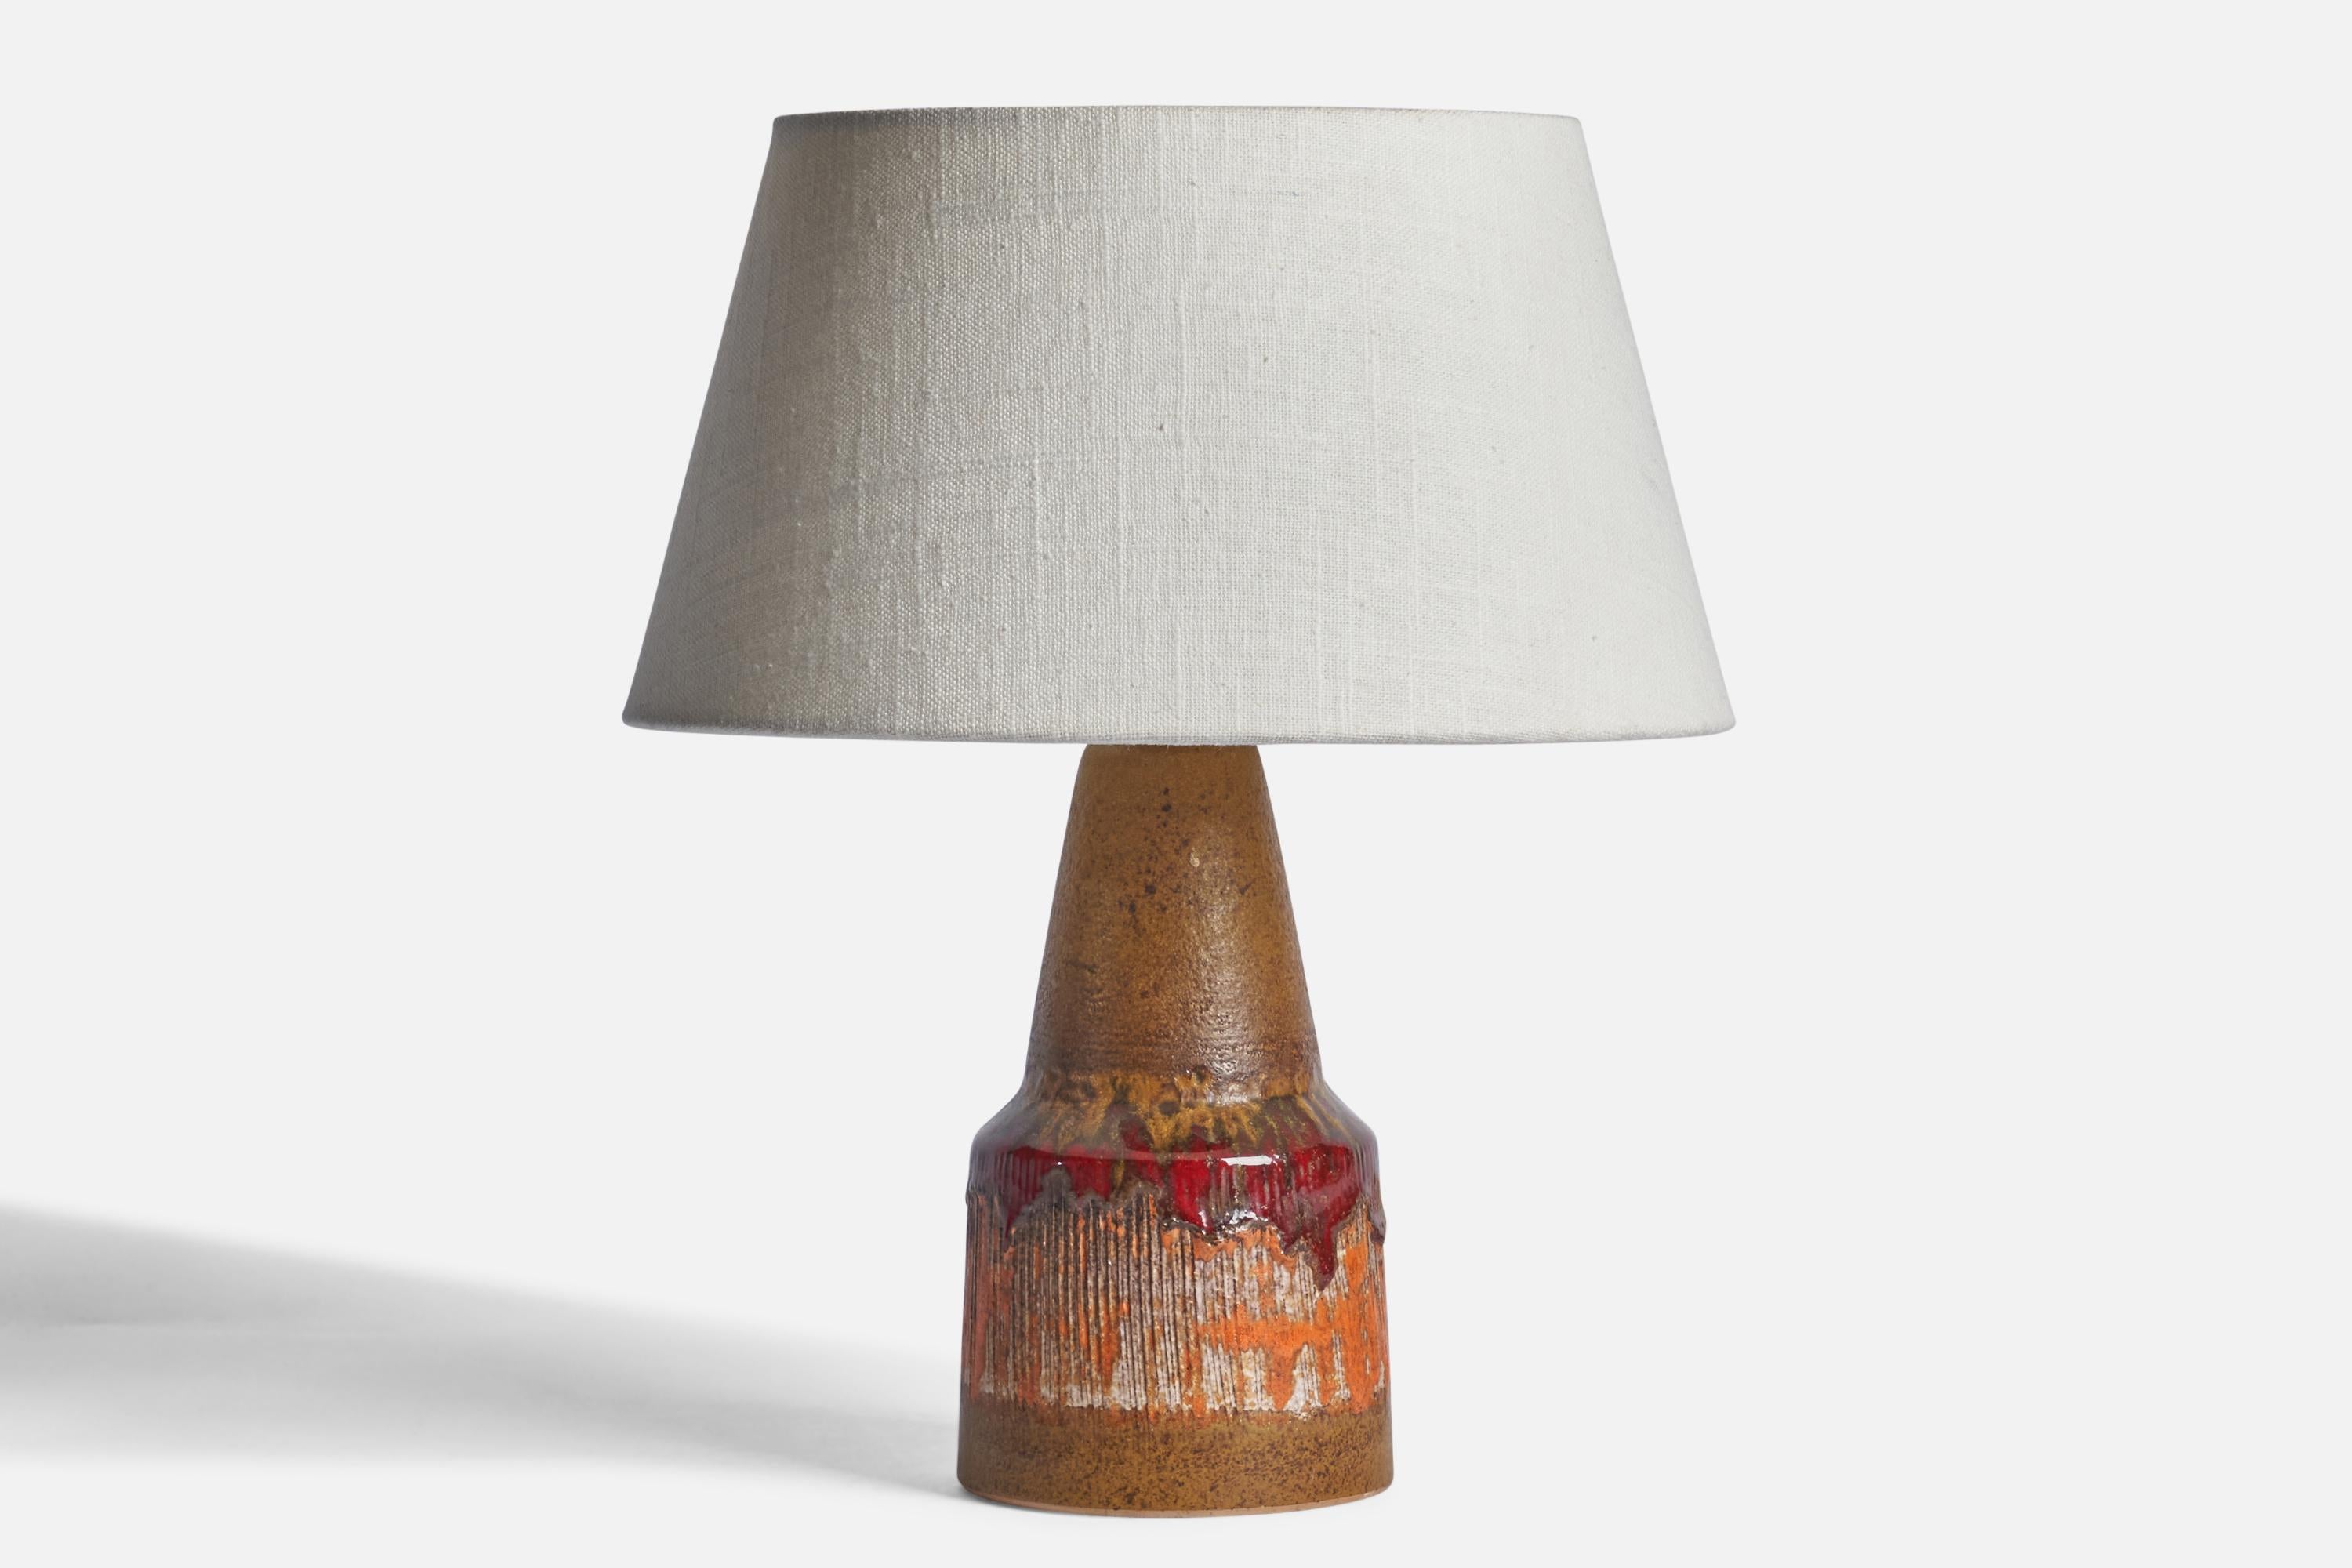 A brown, red and orange-glazed stoneware table lamp designed and produced by Tilgmans Keramik, Sweden, c. 1960s.

Dimensions of Lamp (inches): 9.25” H x 4” Diameter
Dimensions of Shade (inches): 2.5” Top Diameter x 10” Bottom Diameter x